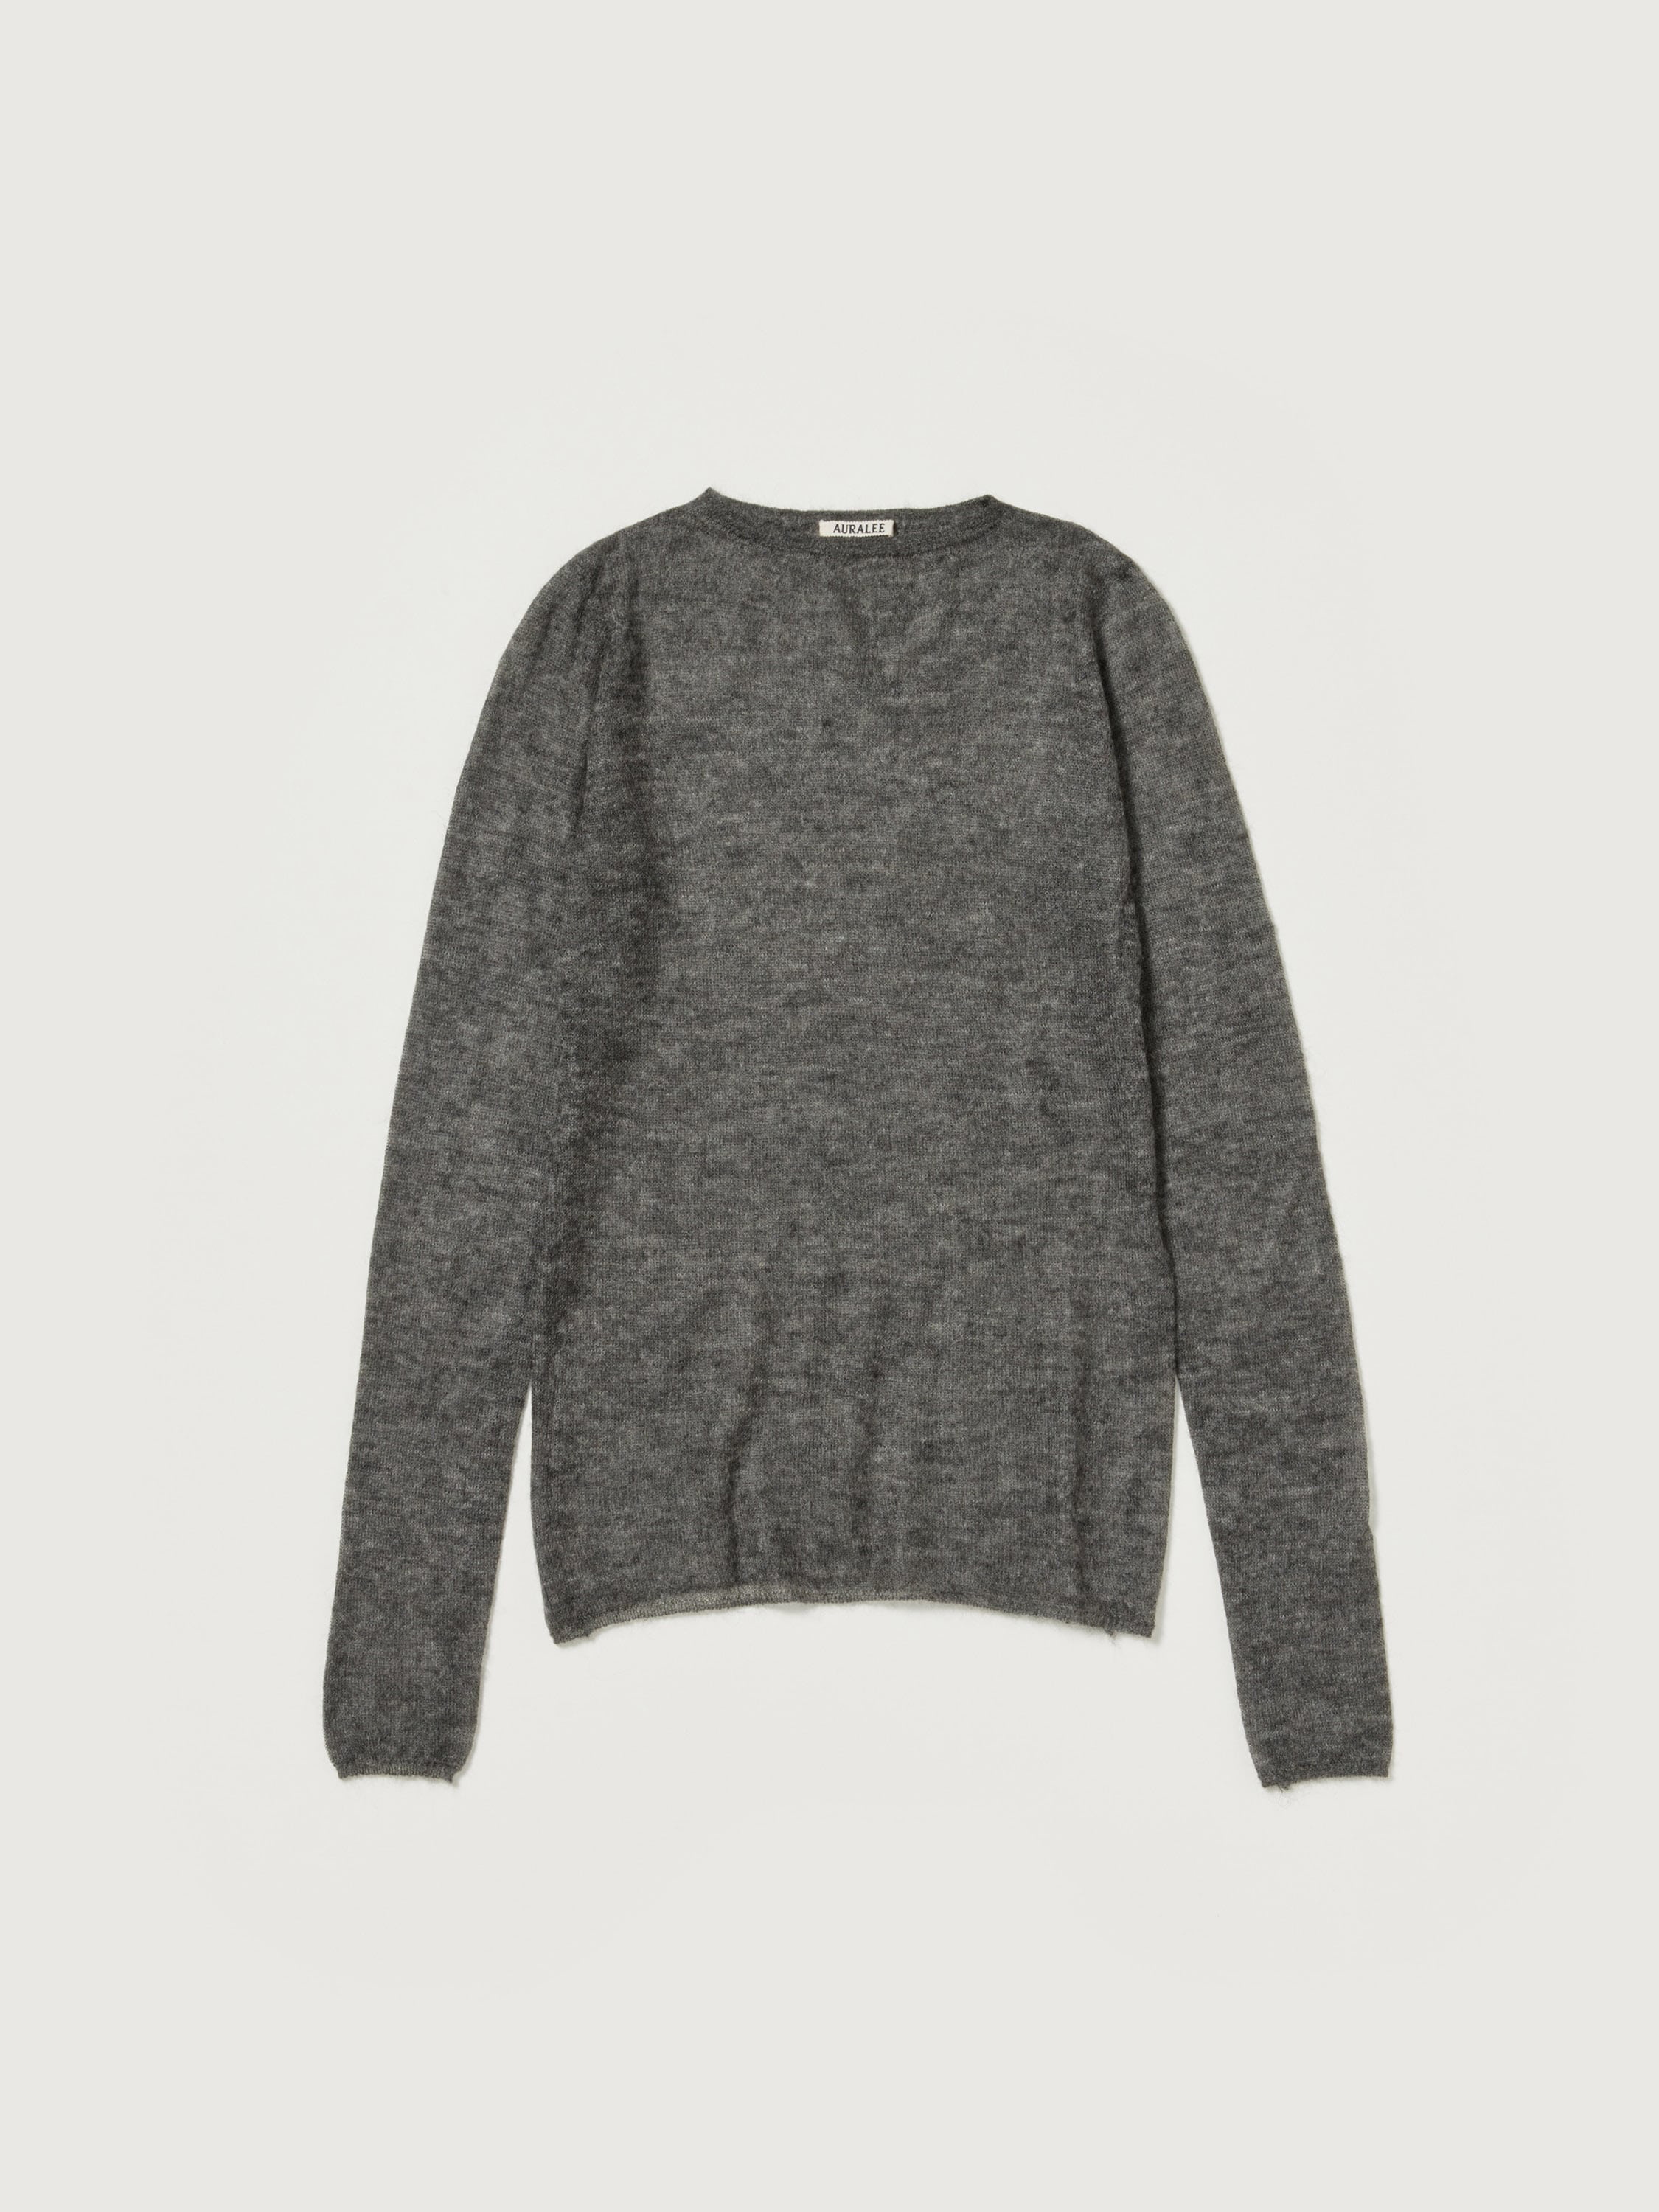 KID MOHAIR SHEER KNIT BOAT NECK P/O 詳細画像 TOP CHARCOAL 5